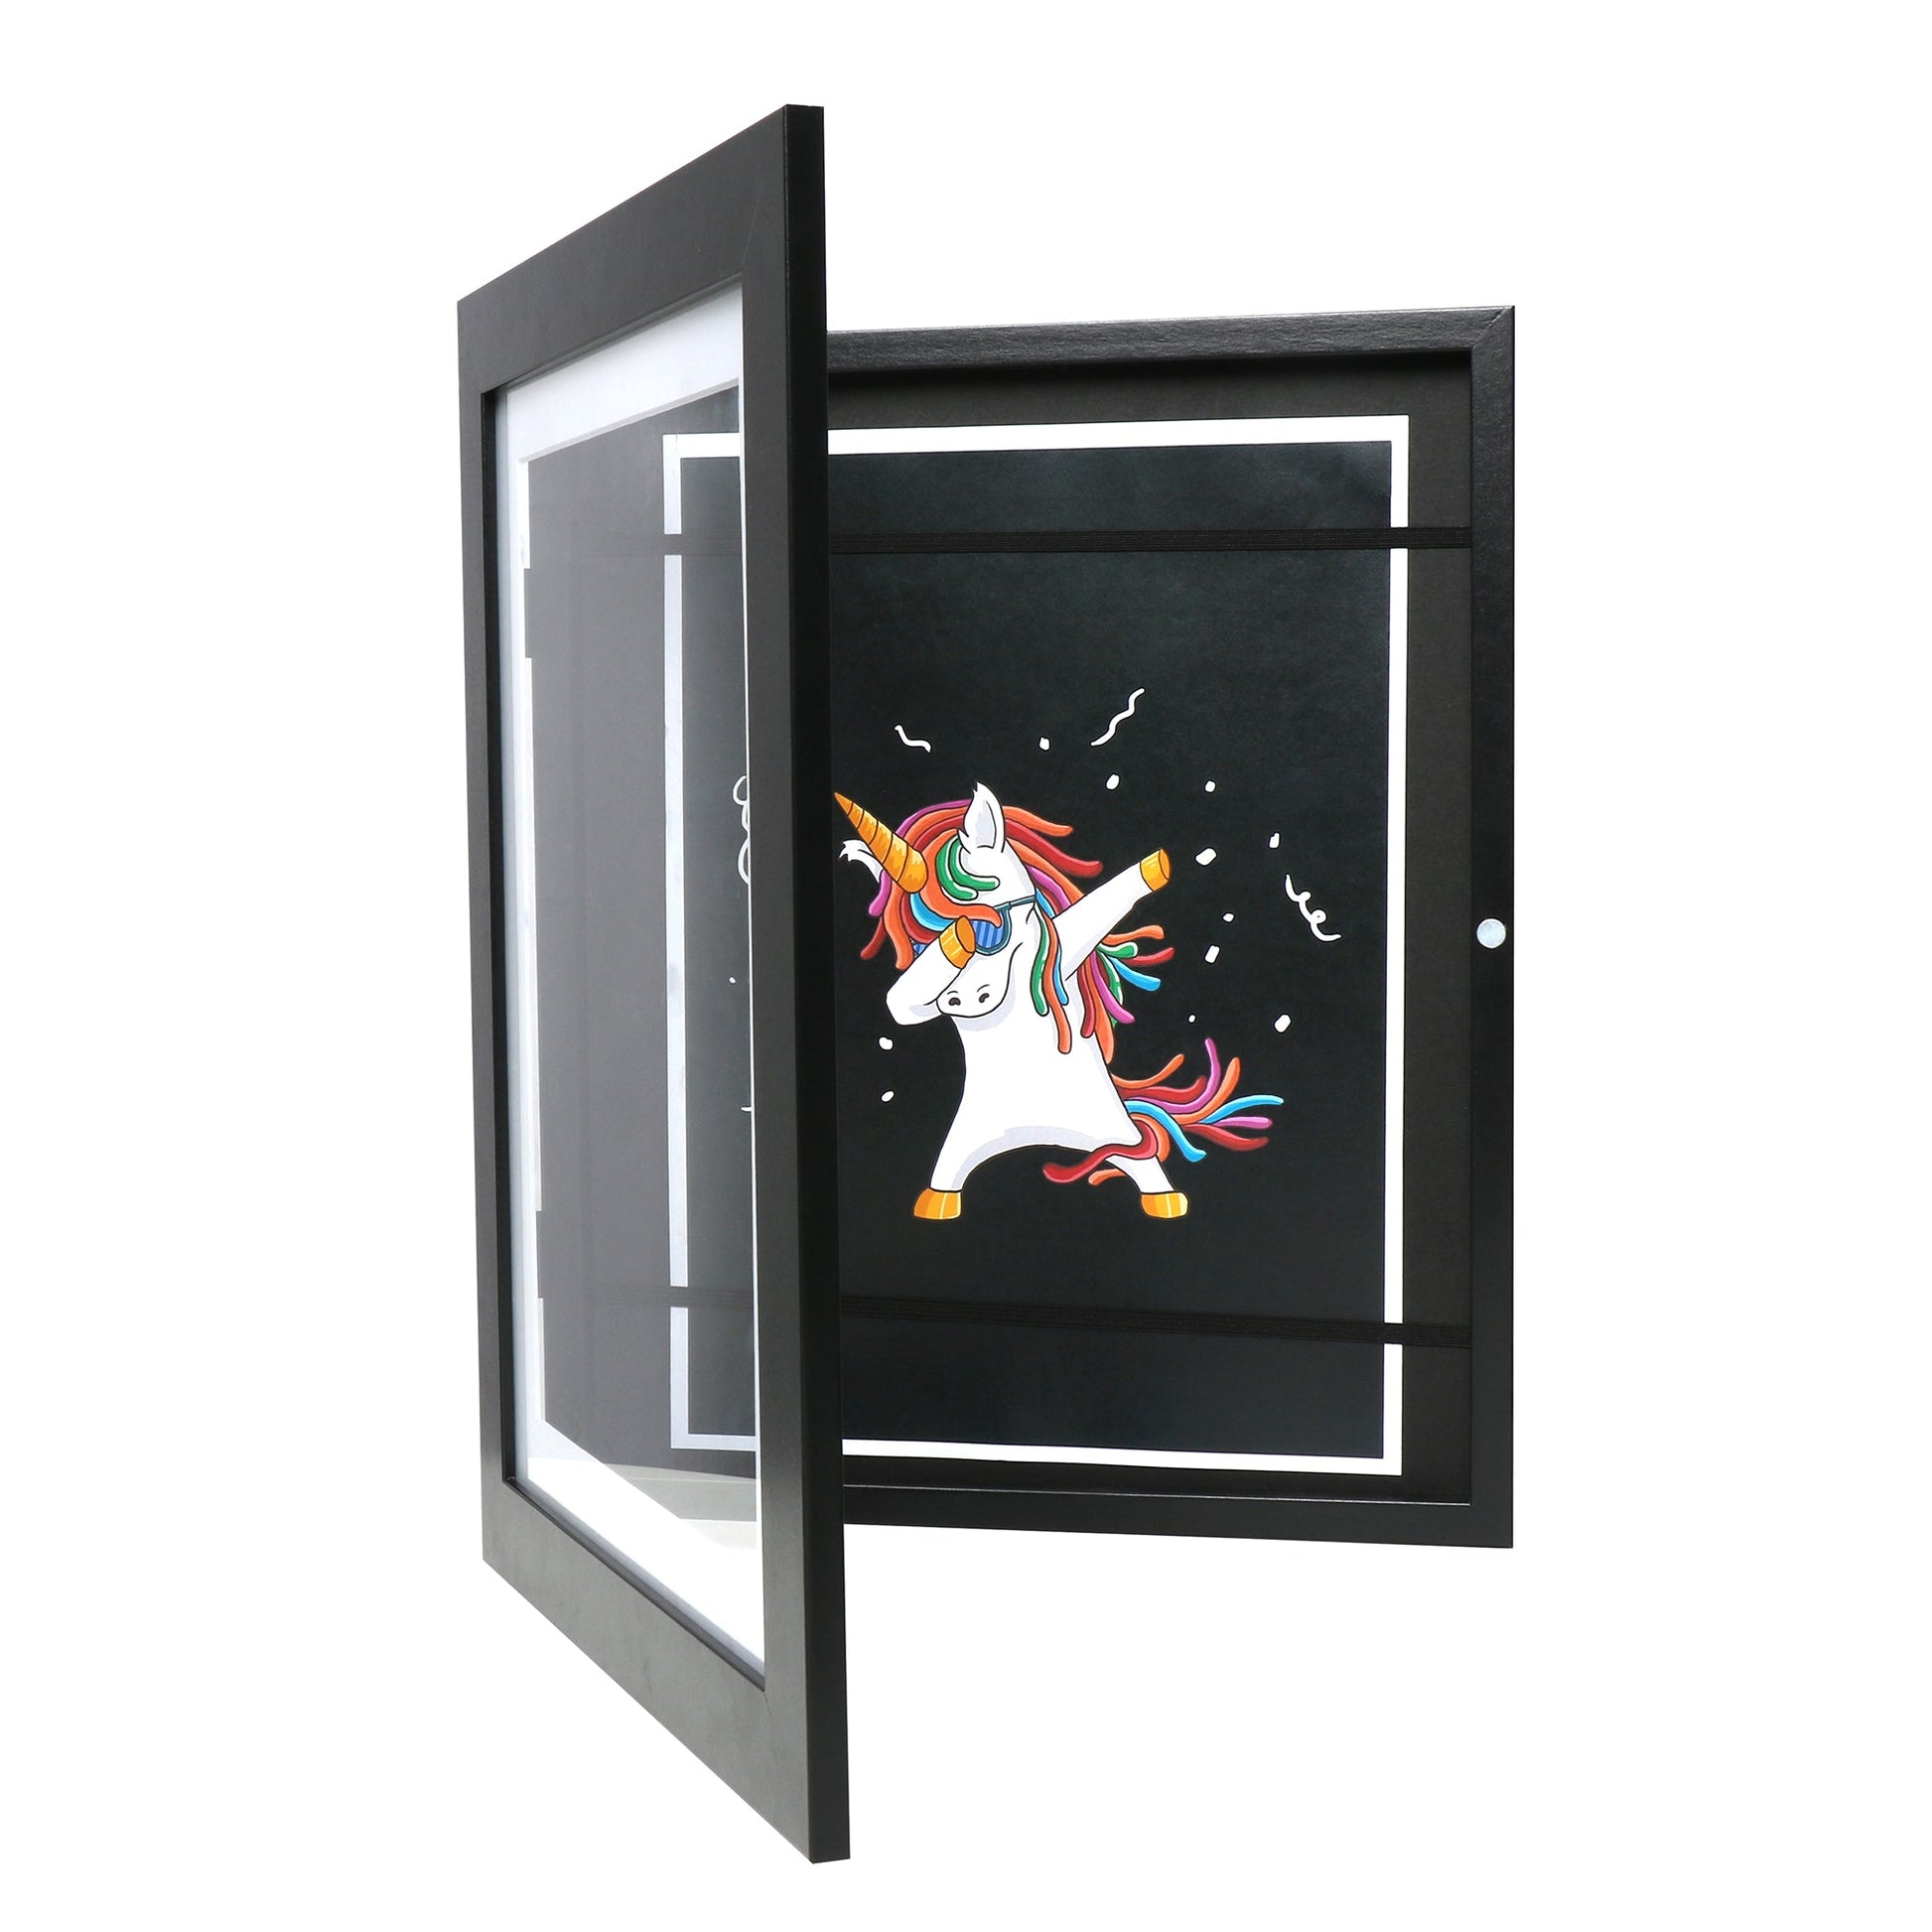 10" x 12.5" Black Wood Children's Art Picture Frame with Elastic Straps